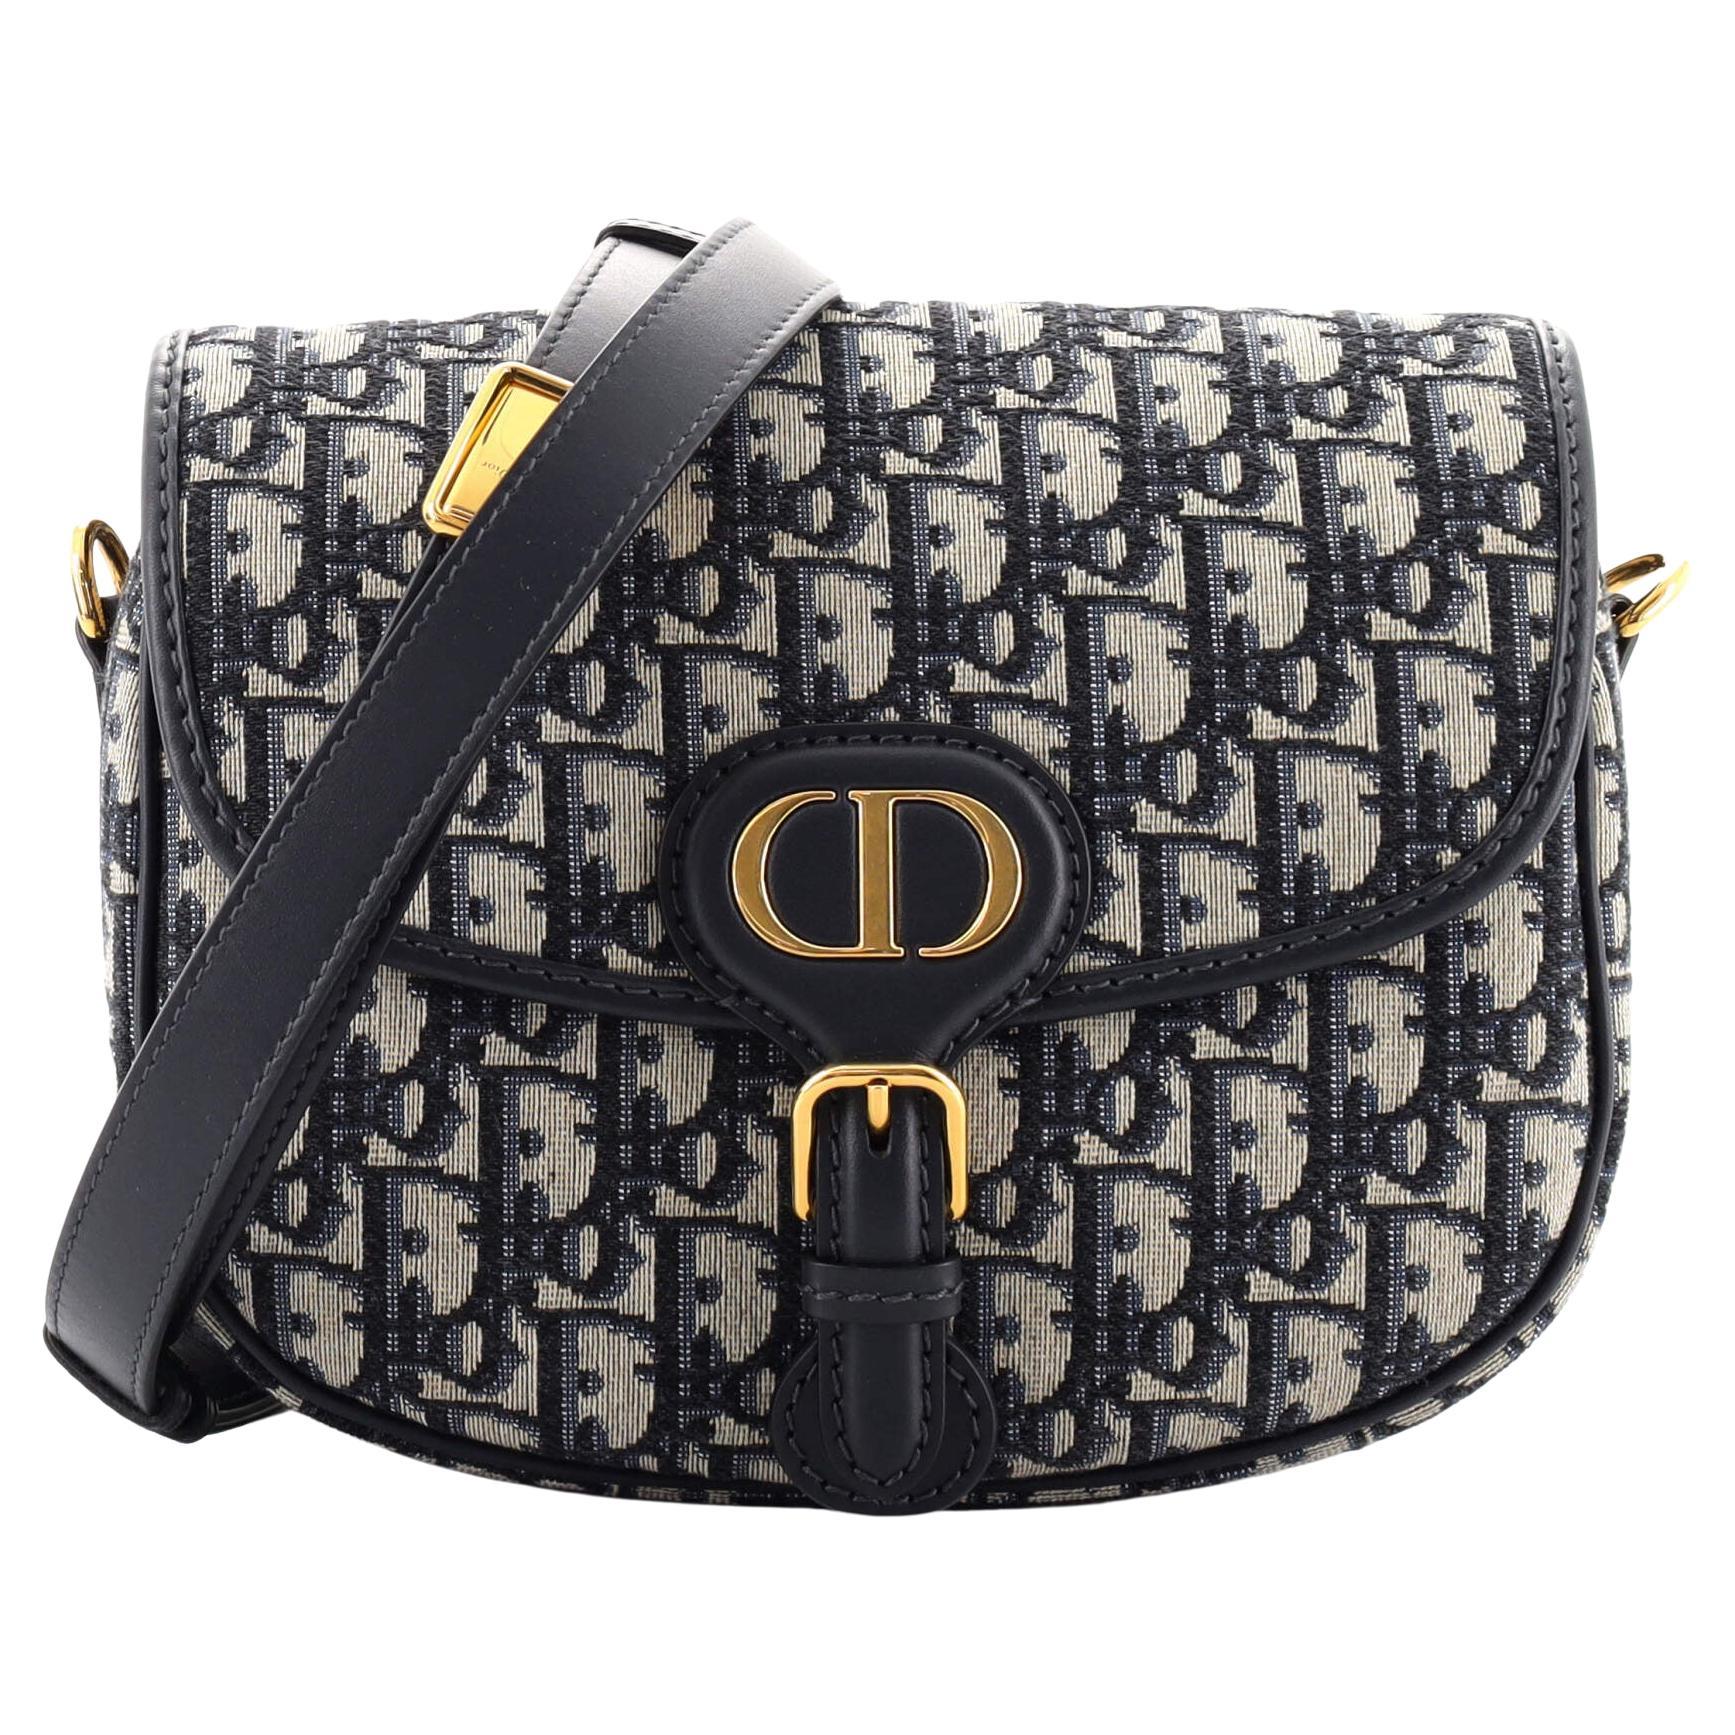 Dior Launch their New Timeless Bag For Fall, Dior Bobby